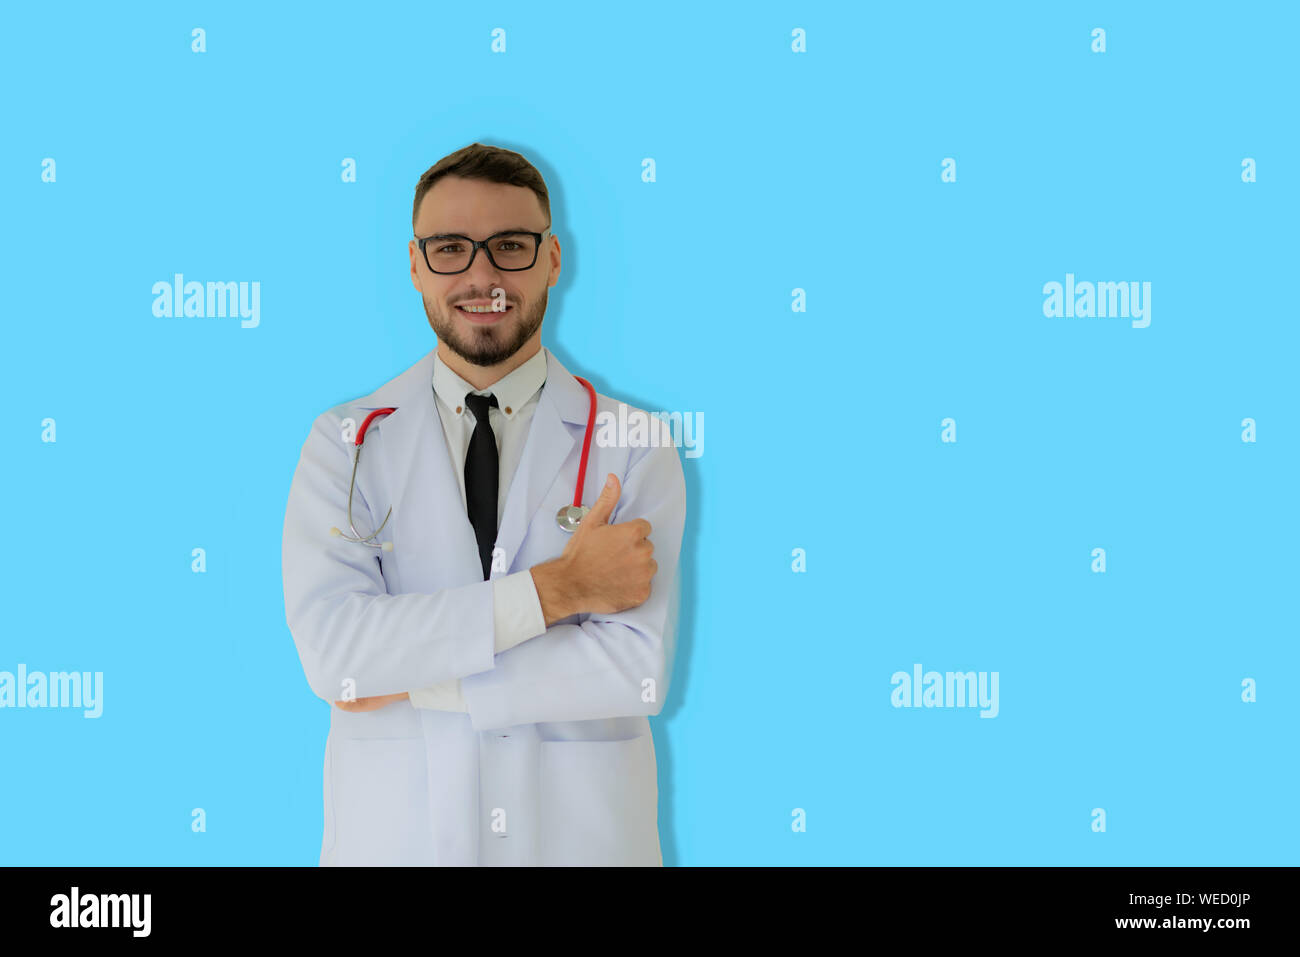 Positive minded practitioner posing with thumbs up with blue background. Stock Photo